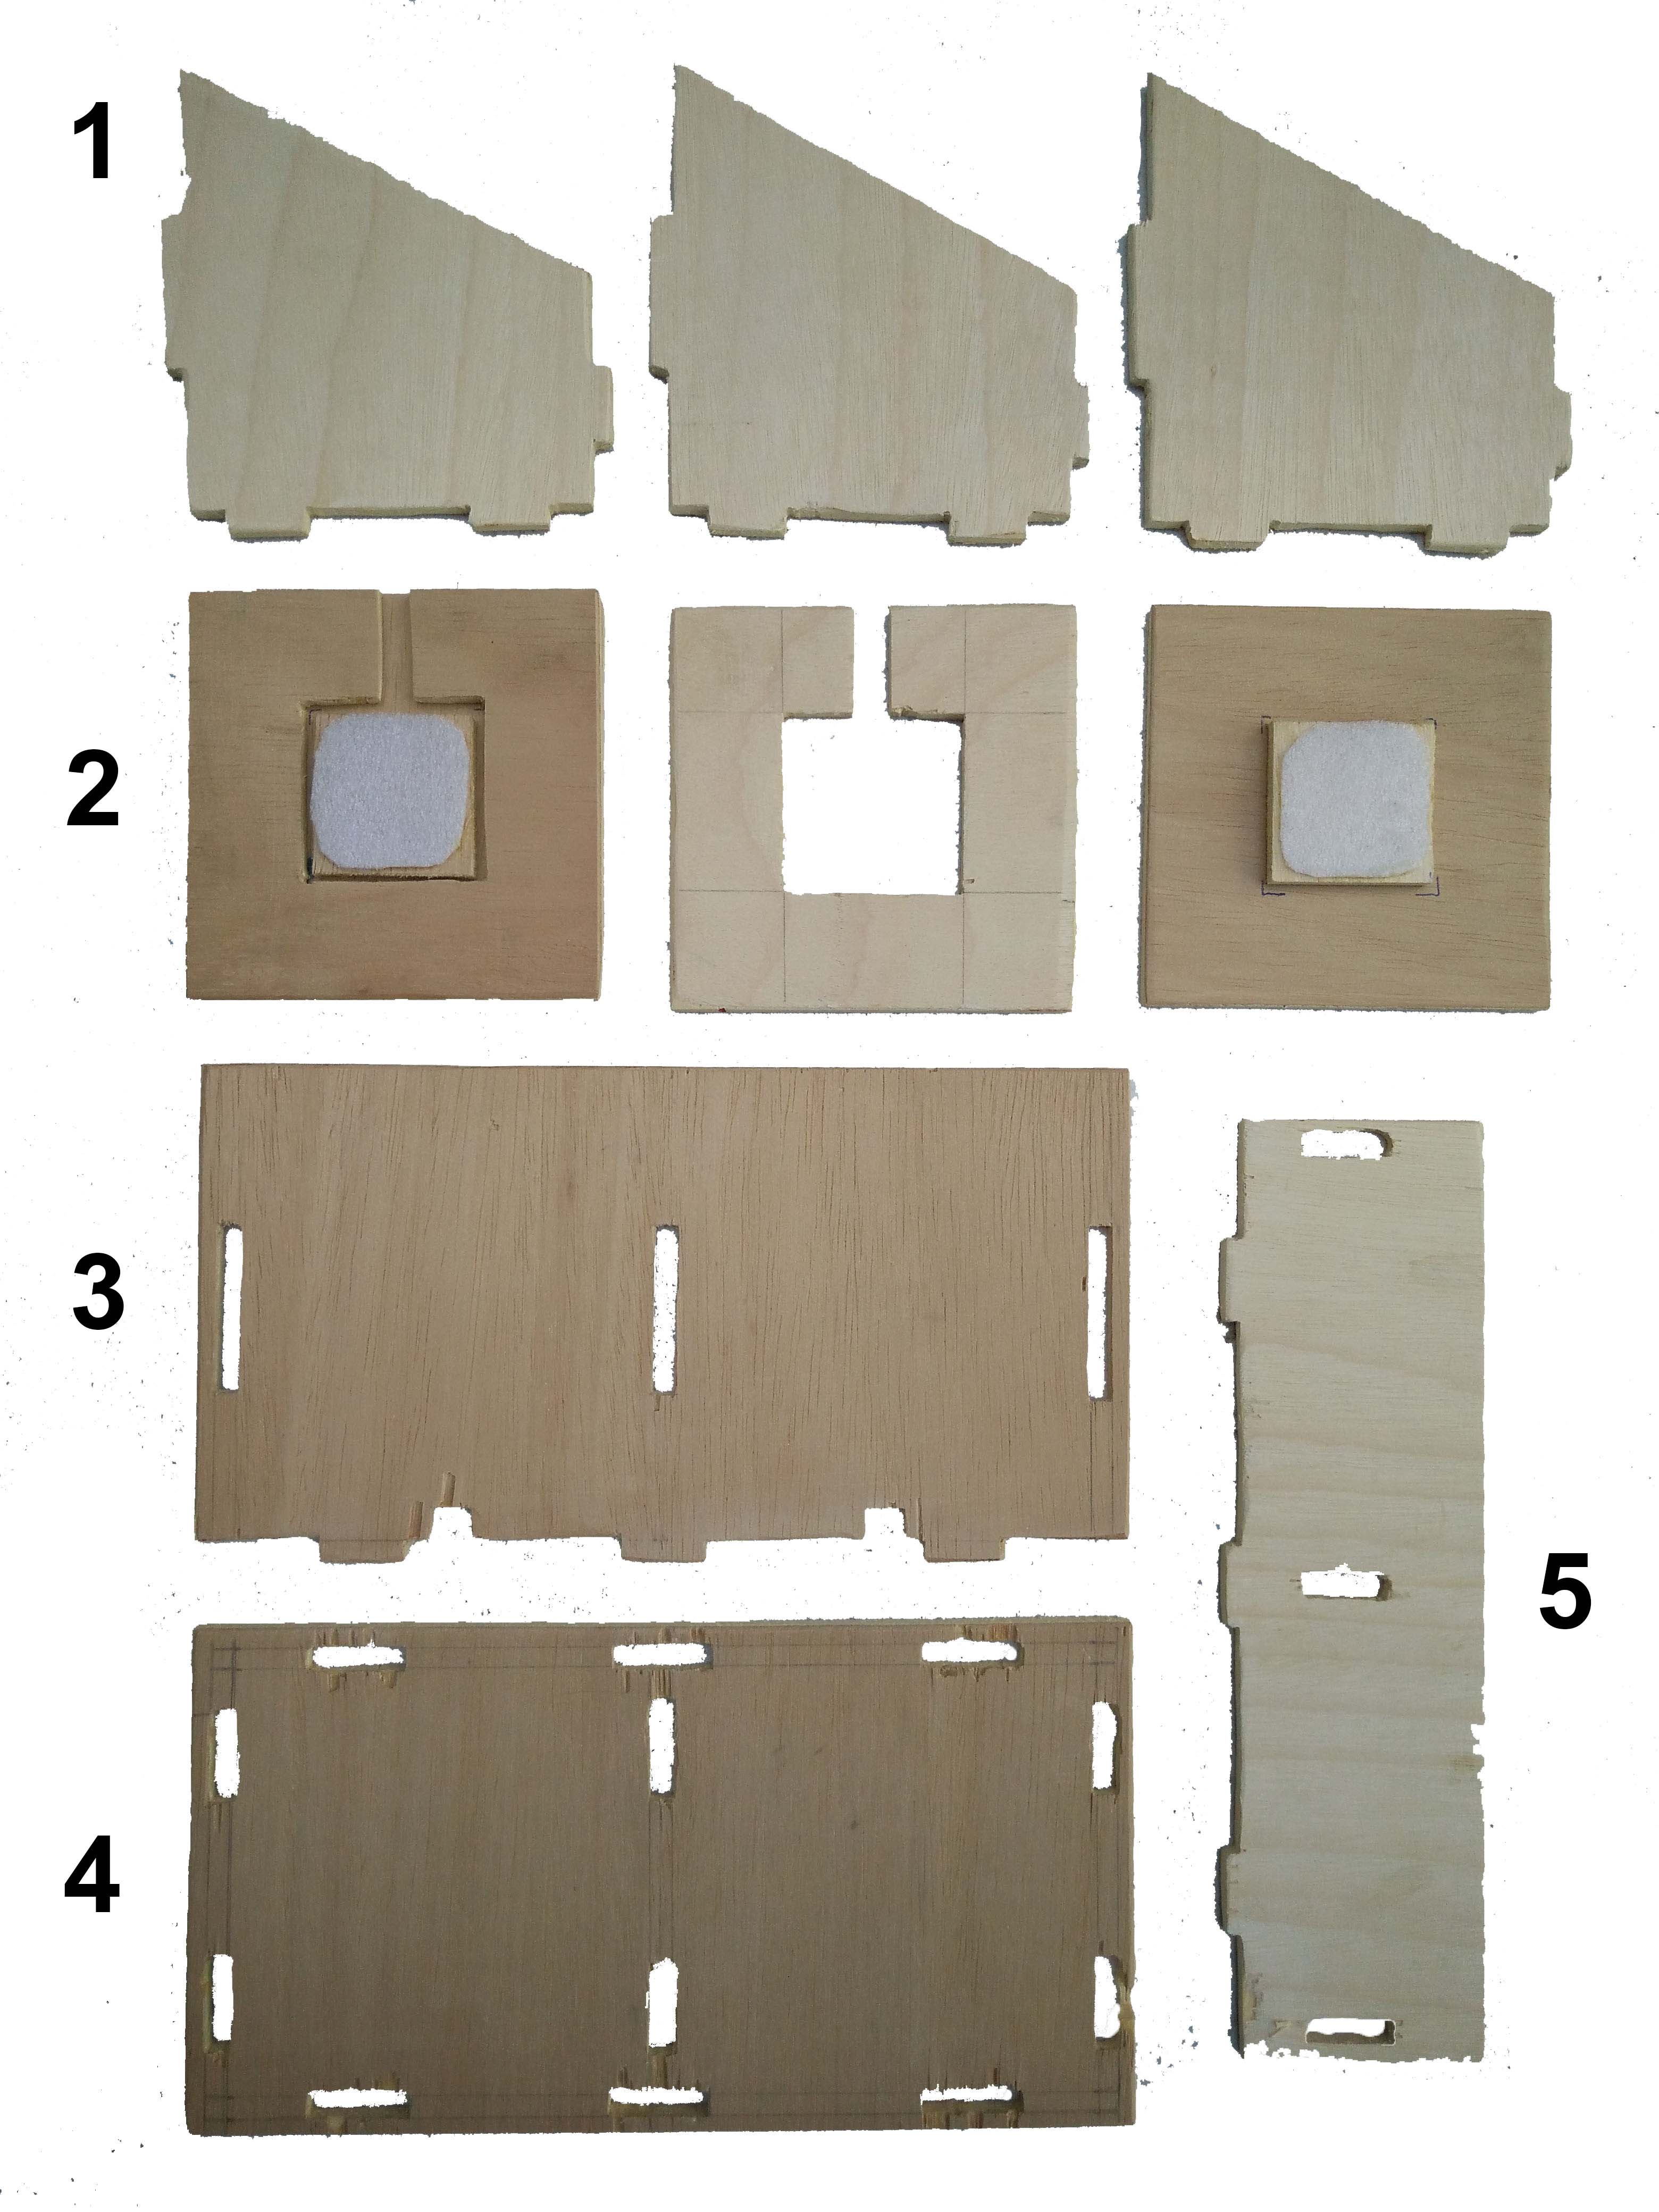 Like numbered in the image: 1: side panels, 2: pressure sensor placeholders and pressure dividers, 3: back panel, 4: bottom panel, 5: front panel